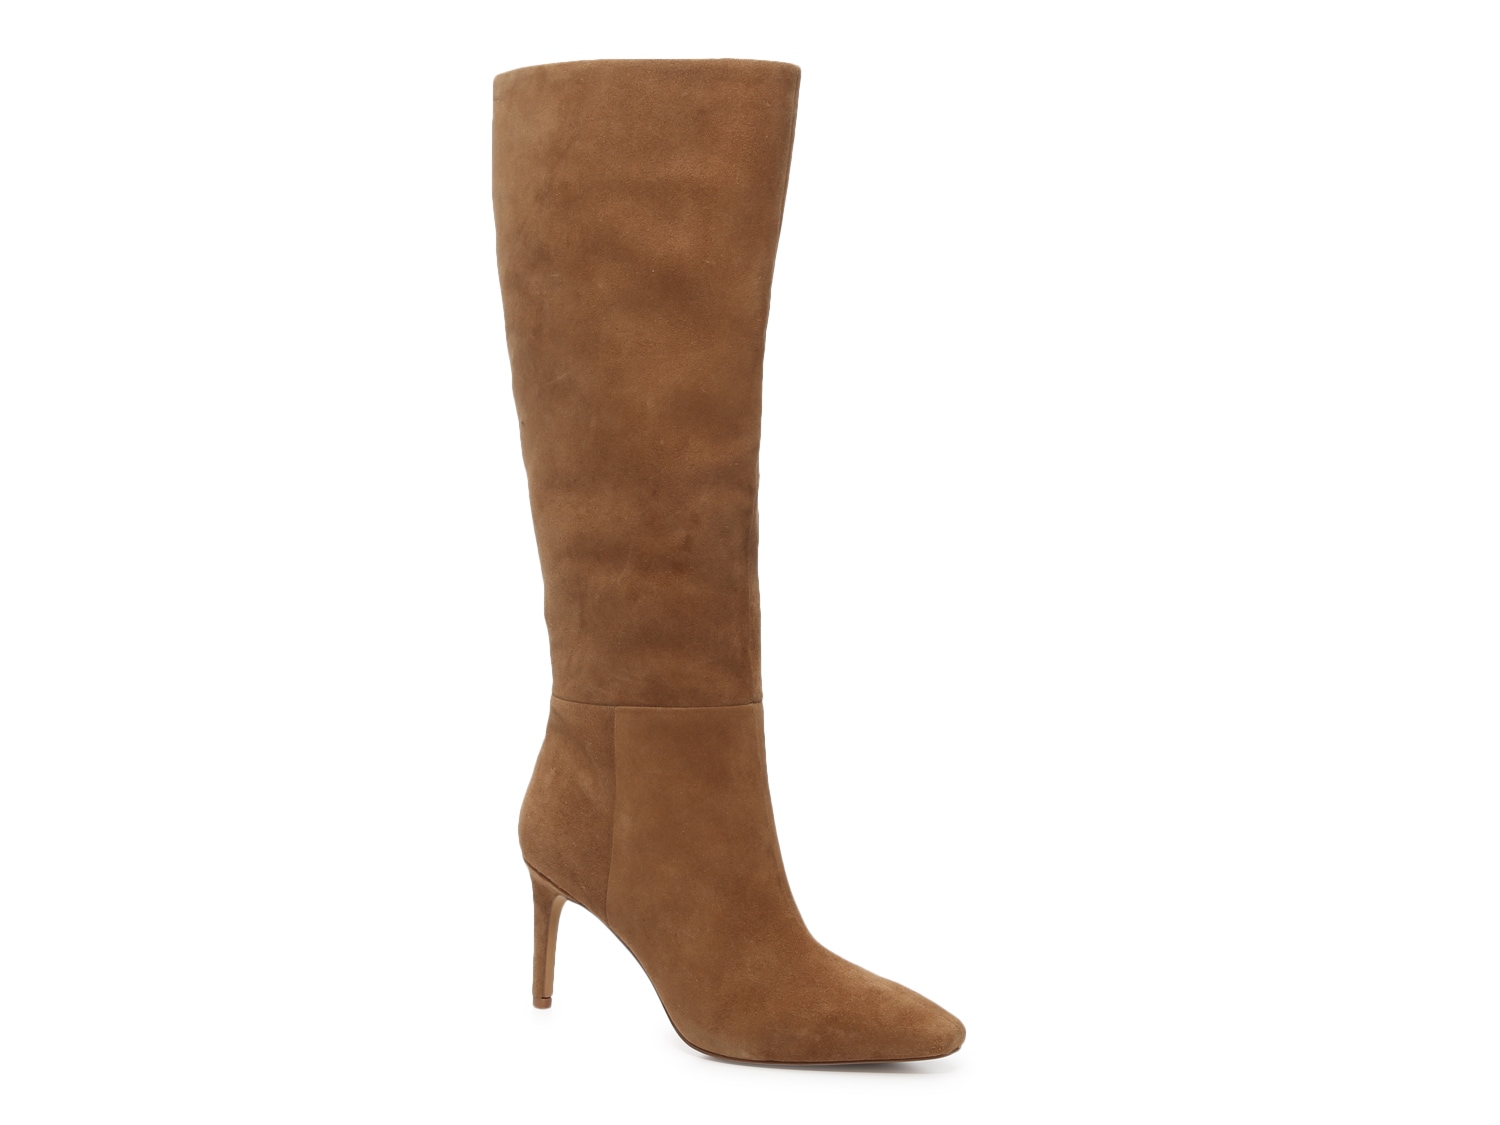 Vince Camuto Arendie Boot - Free Shipping